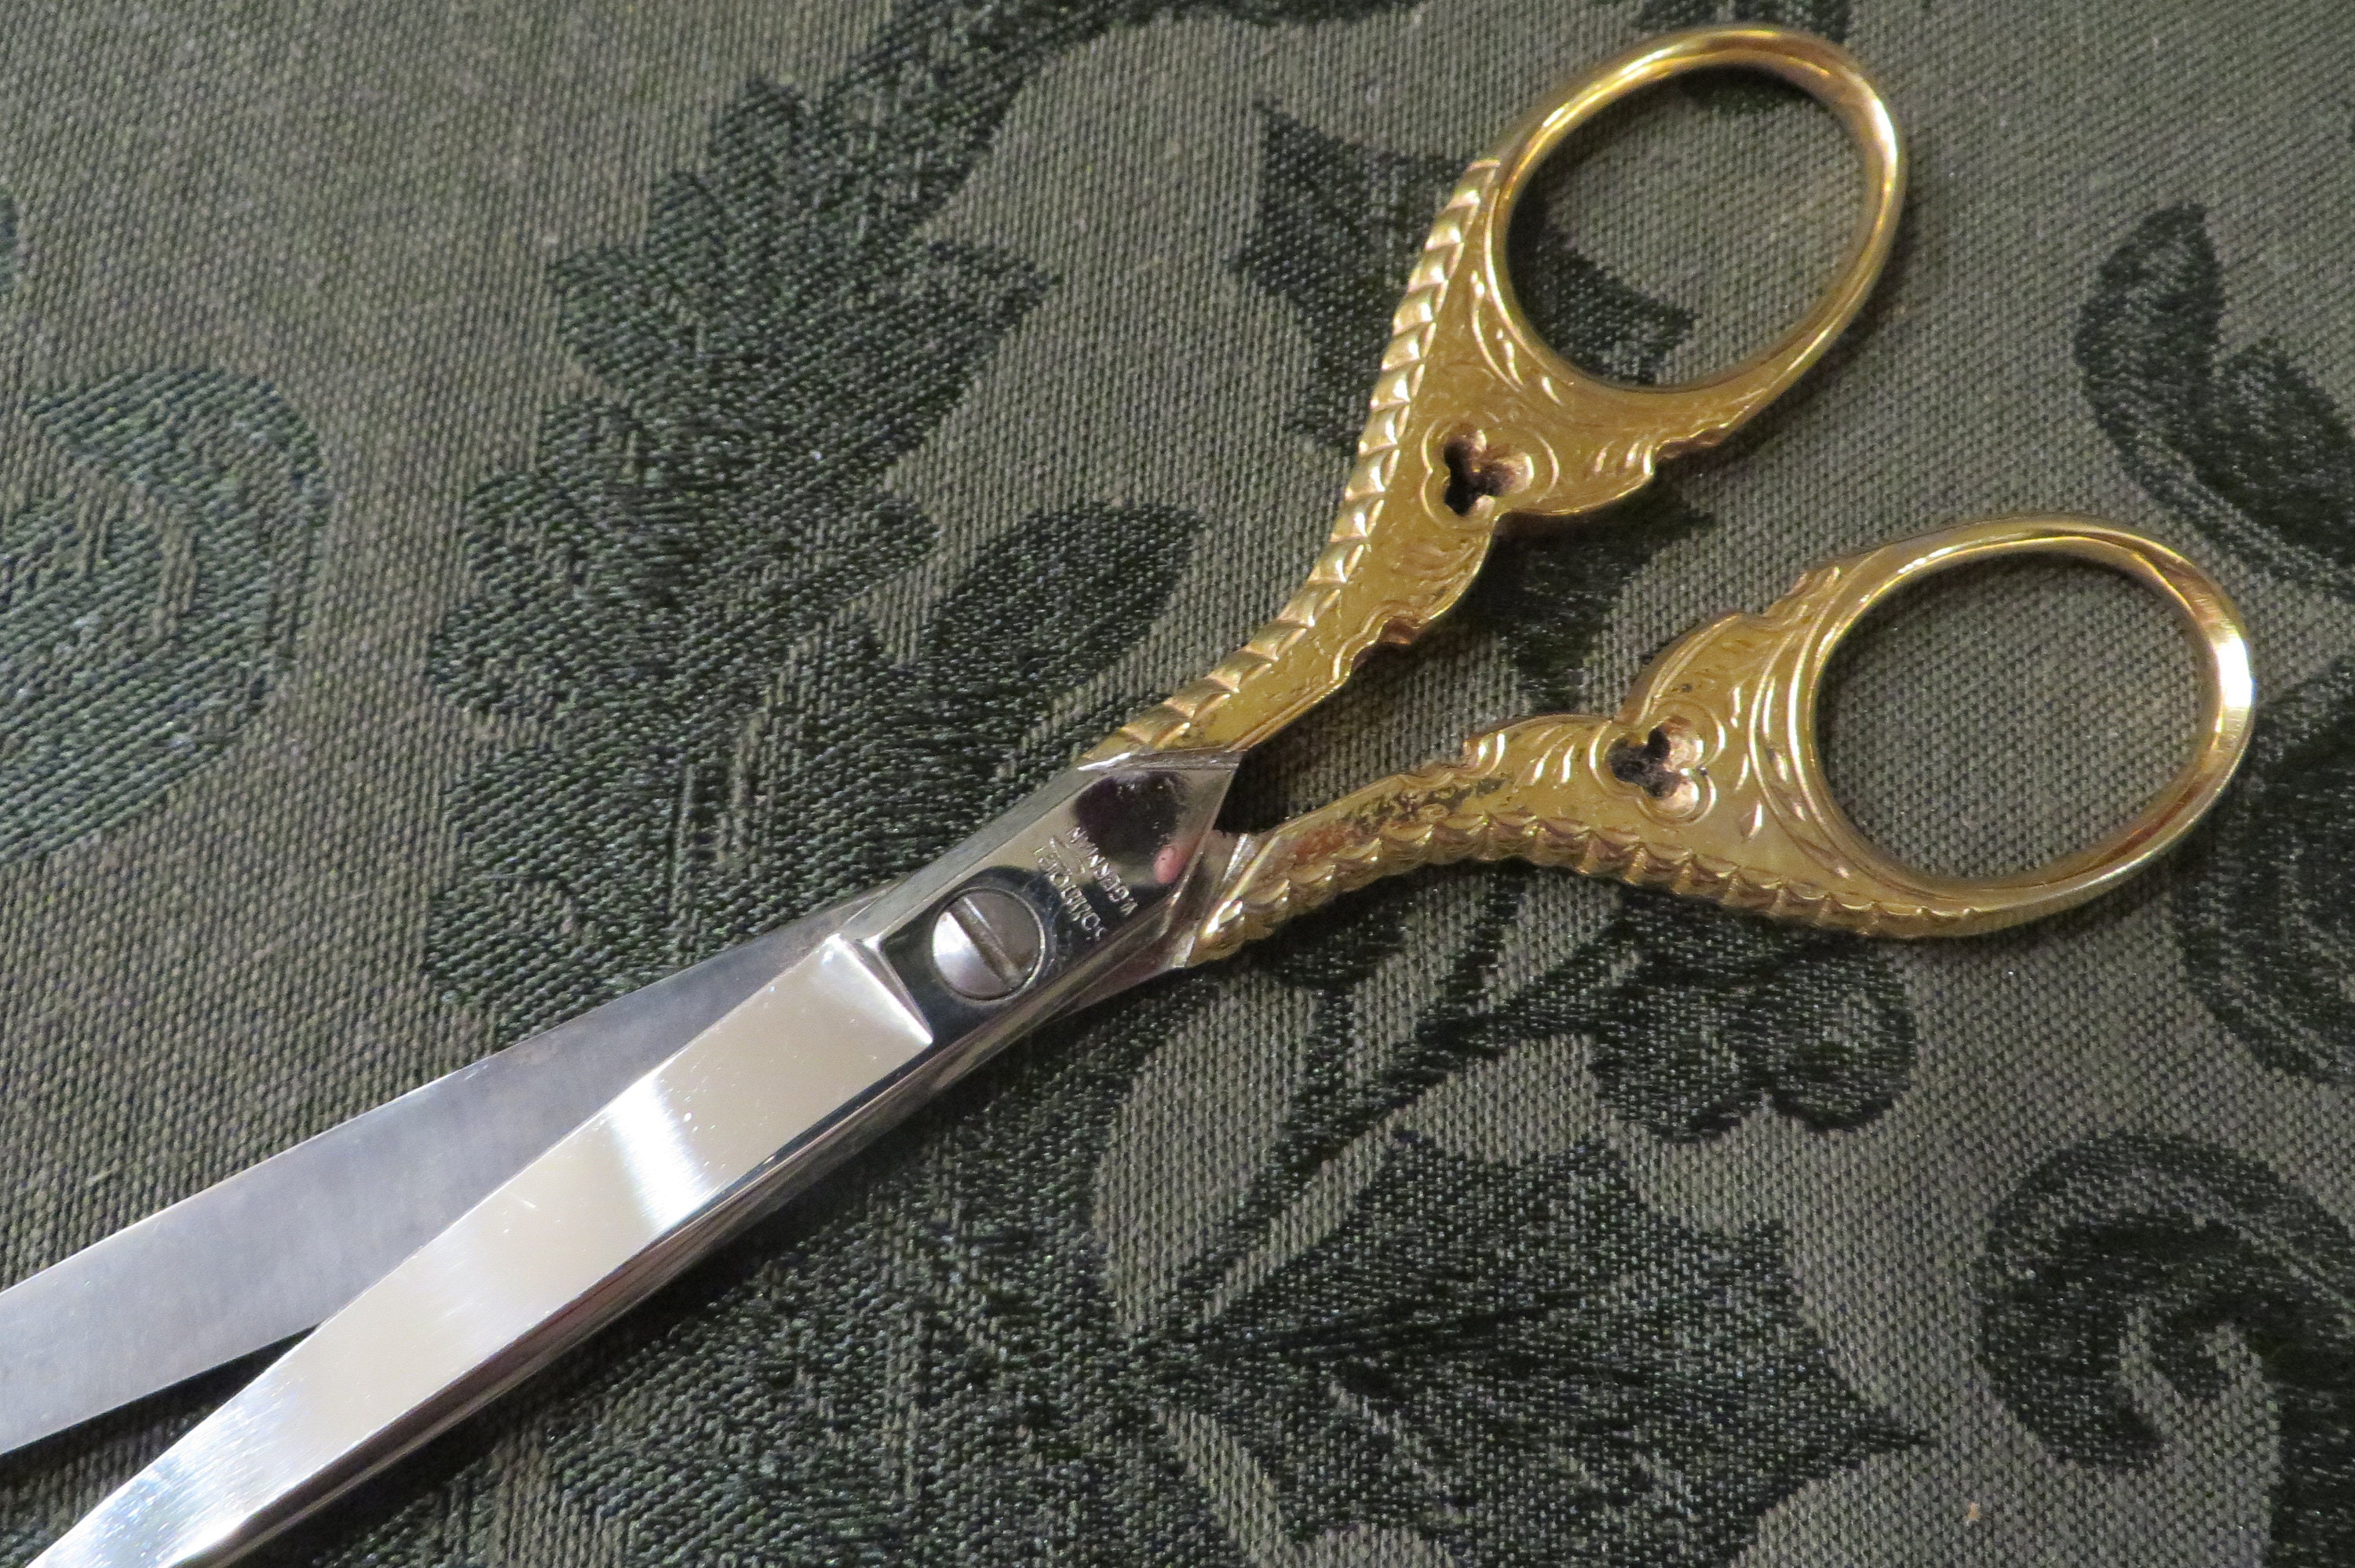 Vintage Kmart 4 1/2 Inch Embroidery White Scissors Made in Korea NEW